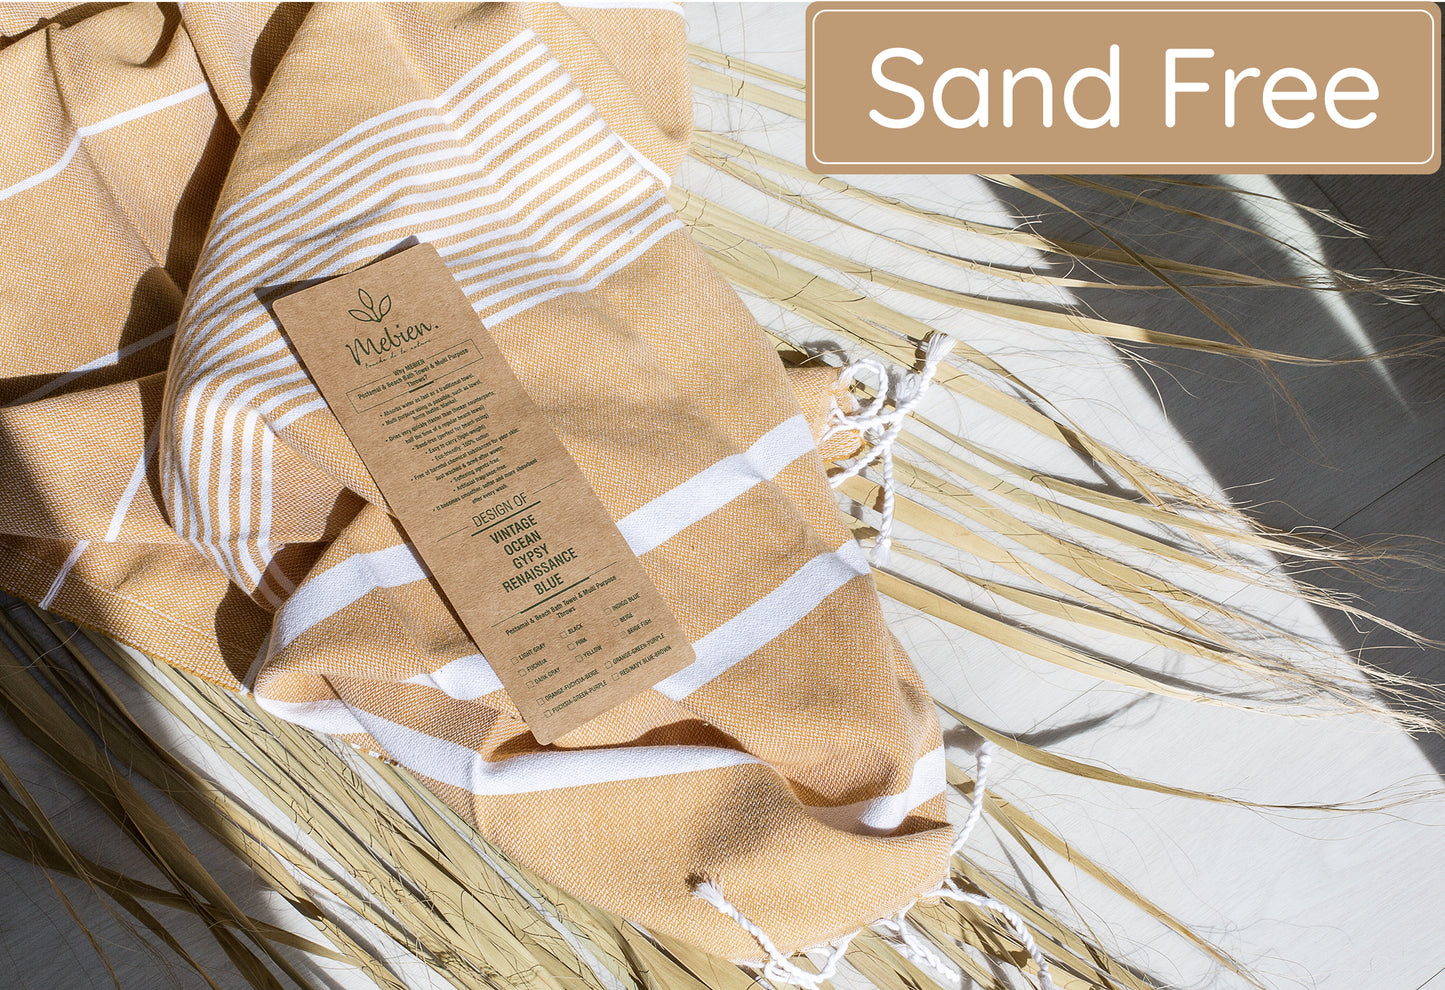 Orange Turkish Beach Towels (35”x67”)  Lightweight, Quick drying and Sand Free Can be Used as Beach Blanket 100% Cotton